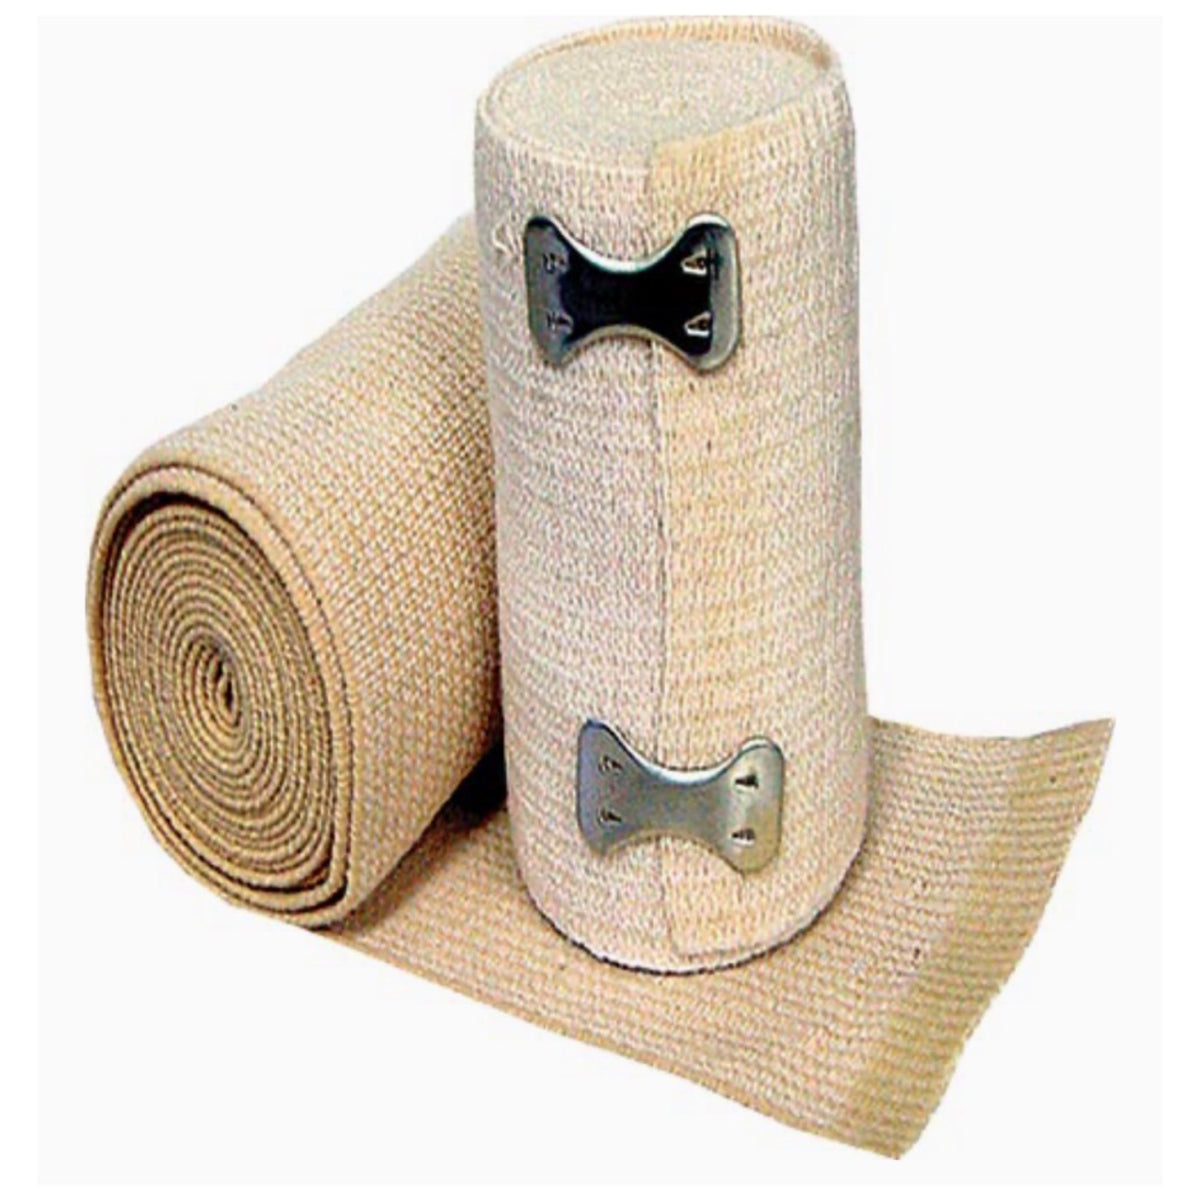 Bell-Horn 5 ft x 4in Elastic Bandage with Clip Closures - Compressive Support, Reusable